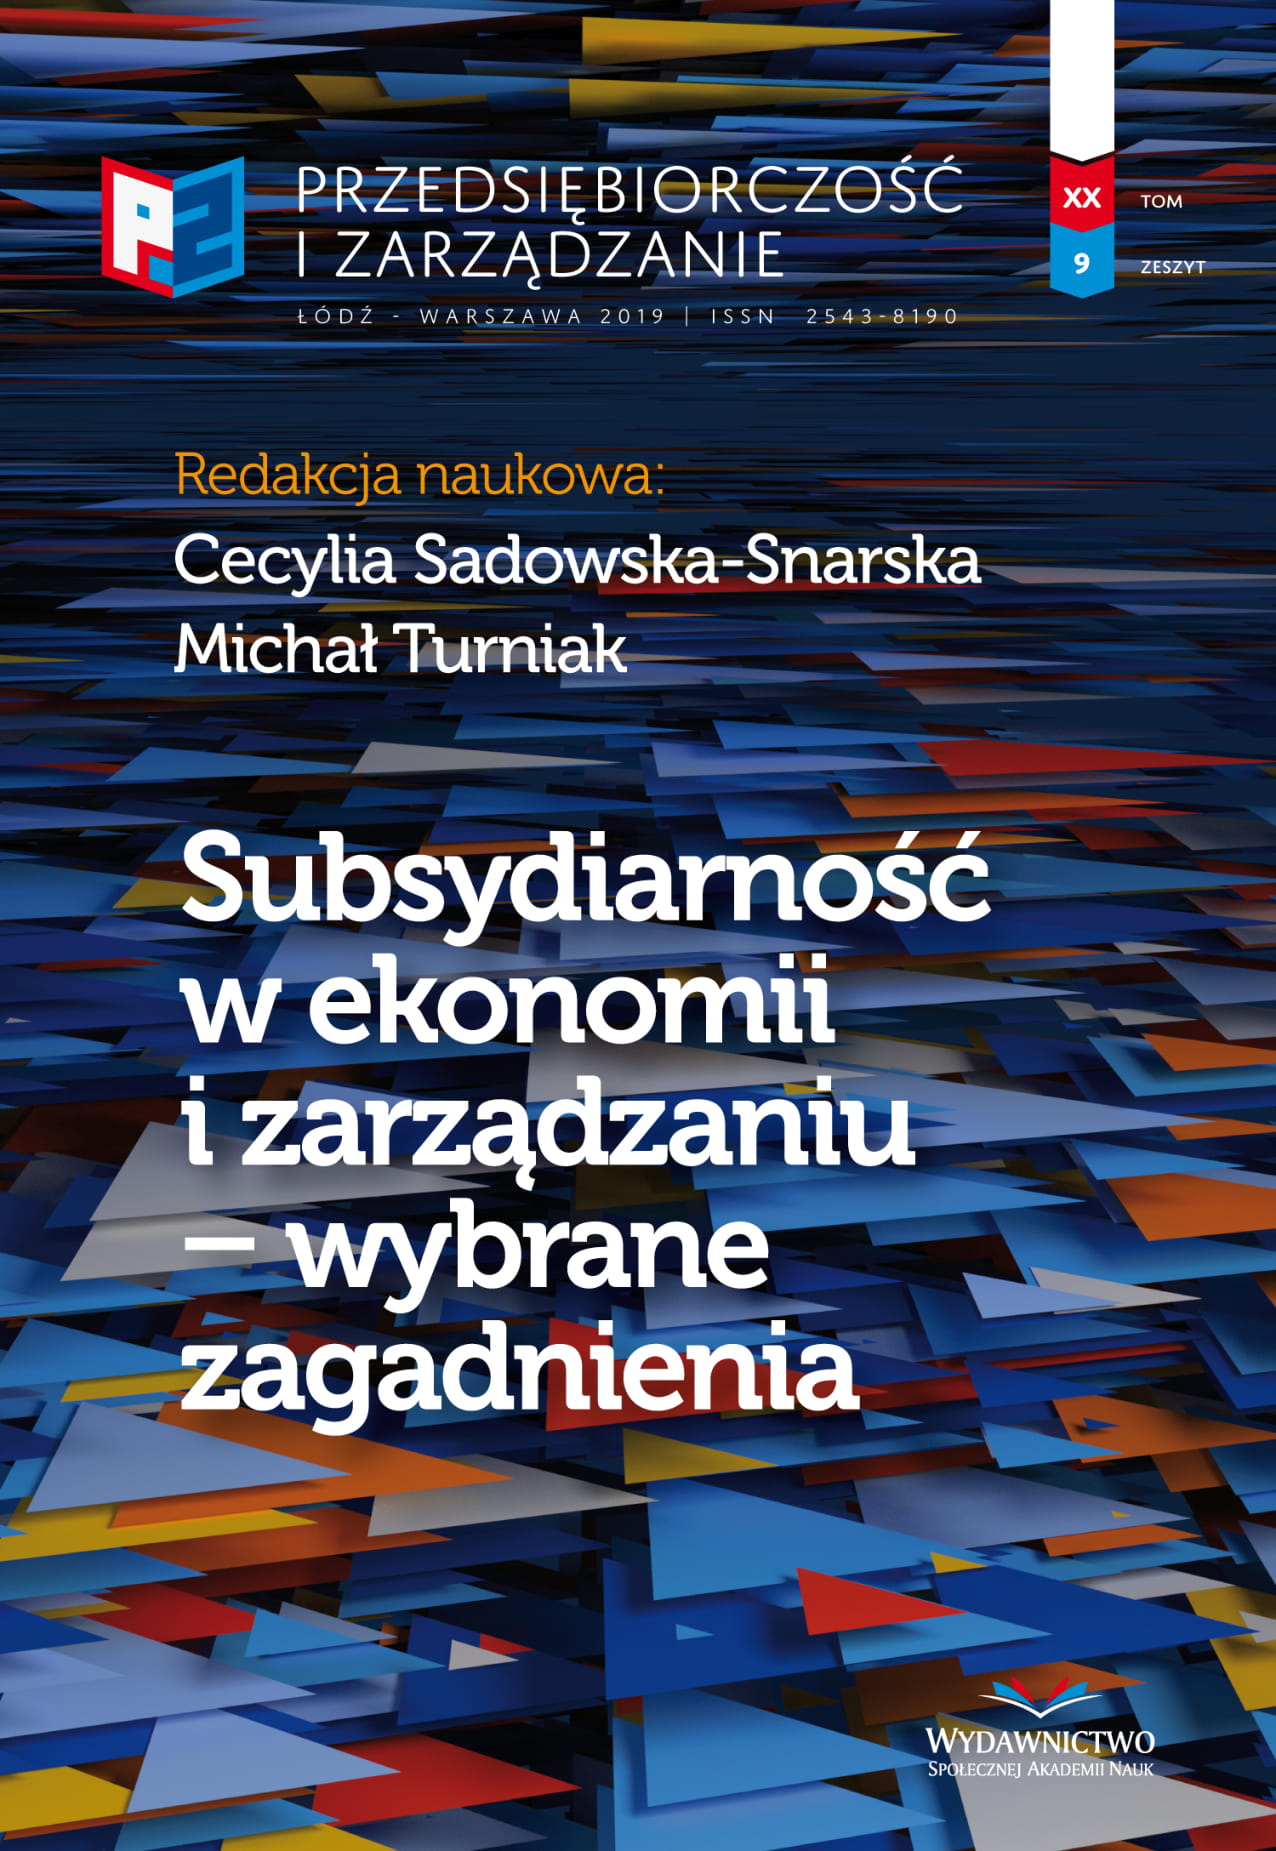 Operation of Special Economic Zones
on the Example of the Suwałki Special Economic Zone Cover Image